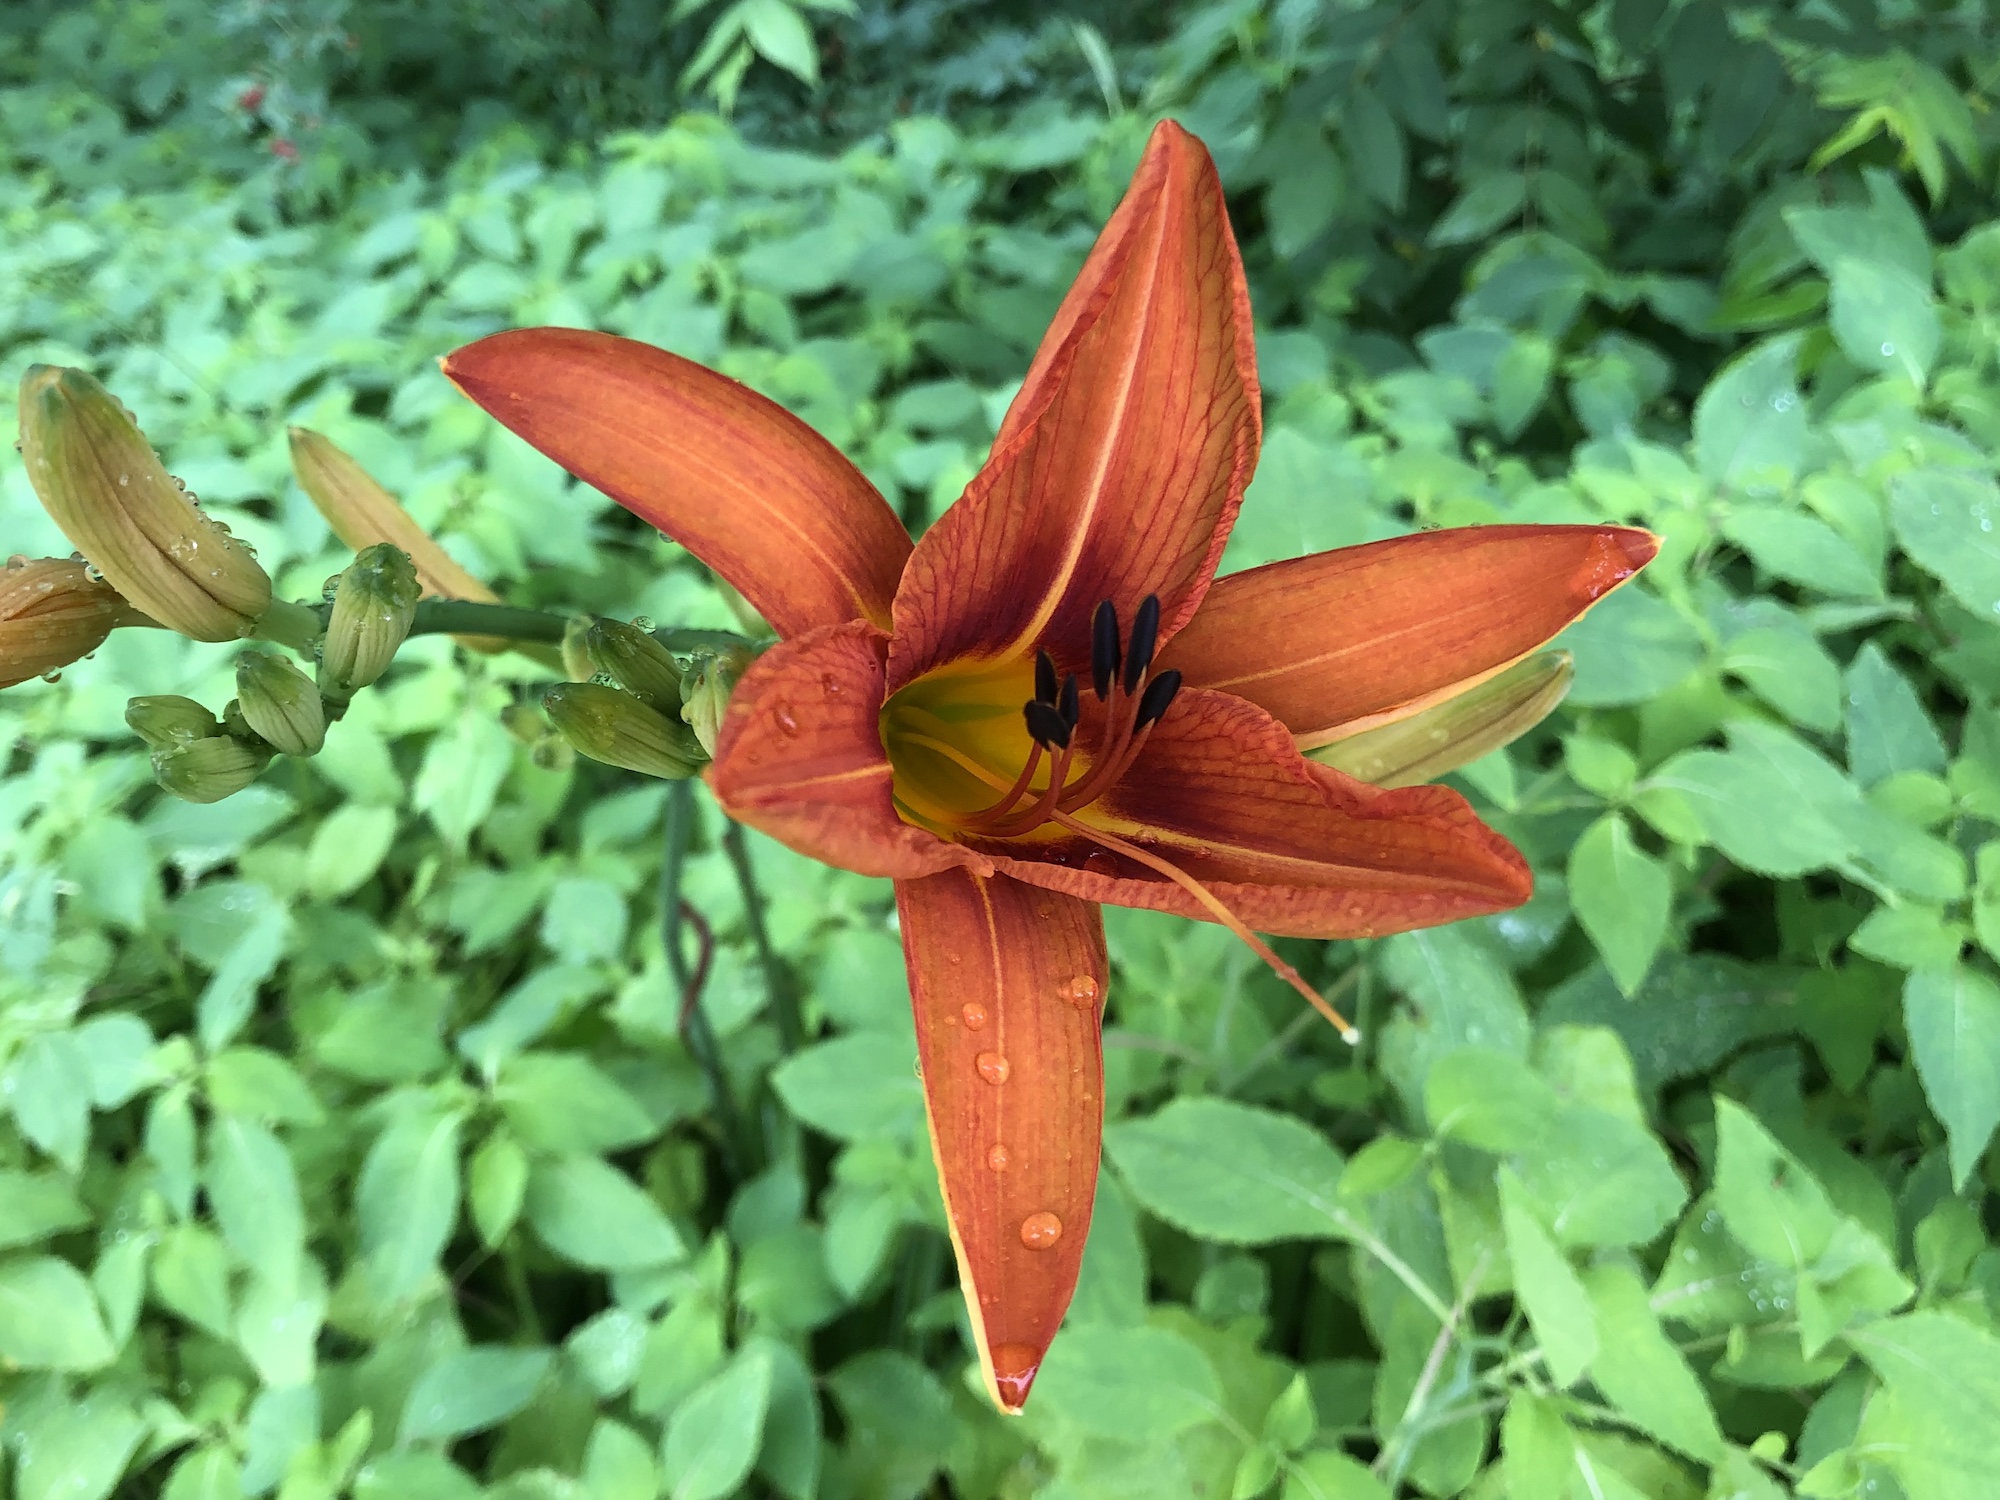 Orange Day Lily on edge of woods by Oak Savanna in Madison, Wisconsin on July 6, 2019.